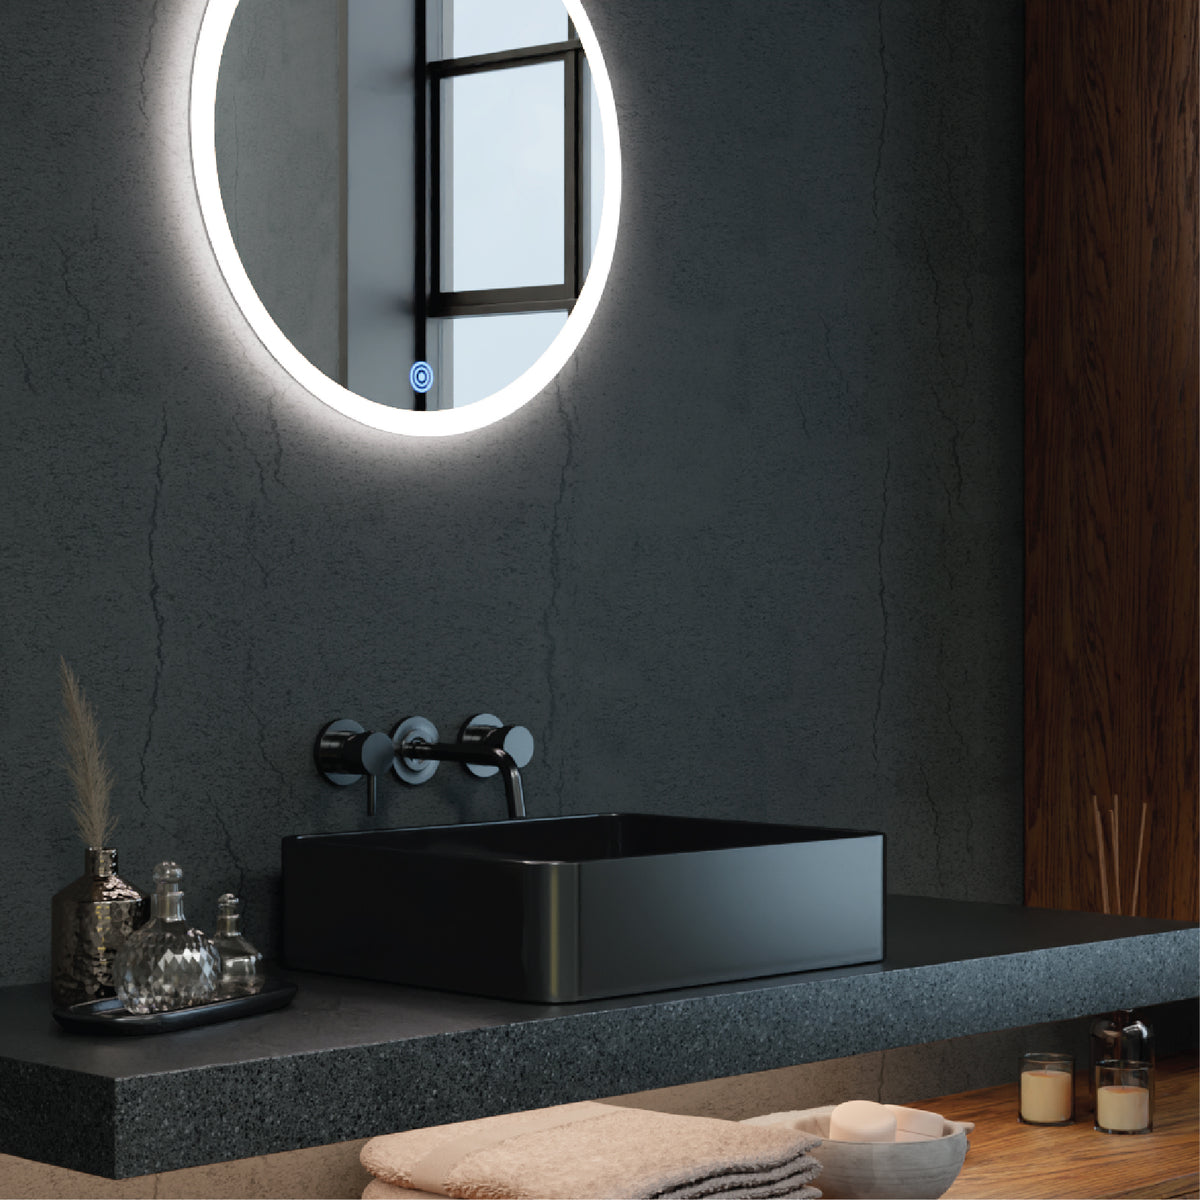 Achieve the ideal lighting for any moment with the Titan LED Mirror's dimmable brightness feature, providing a personalized and comfortable environment.